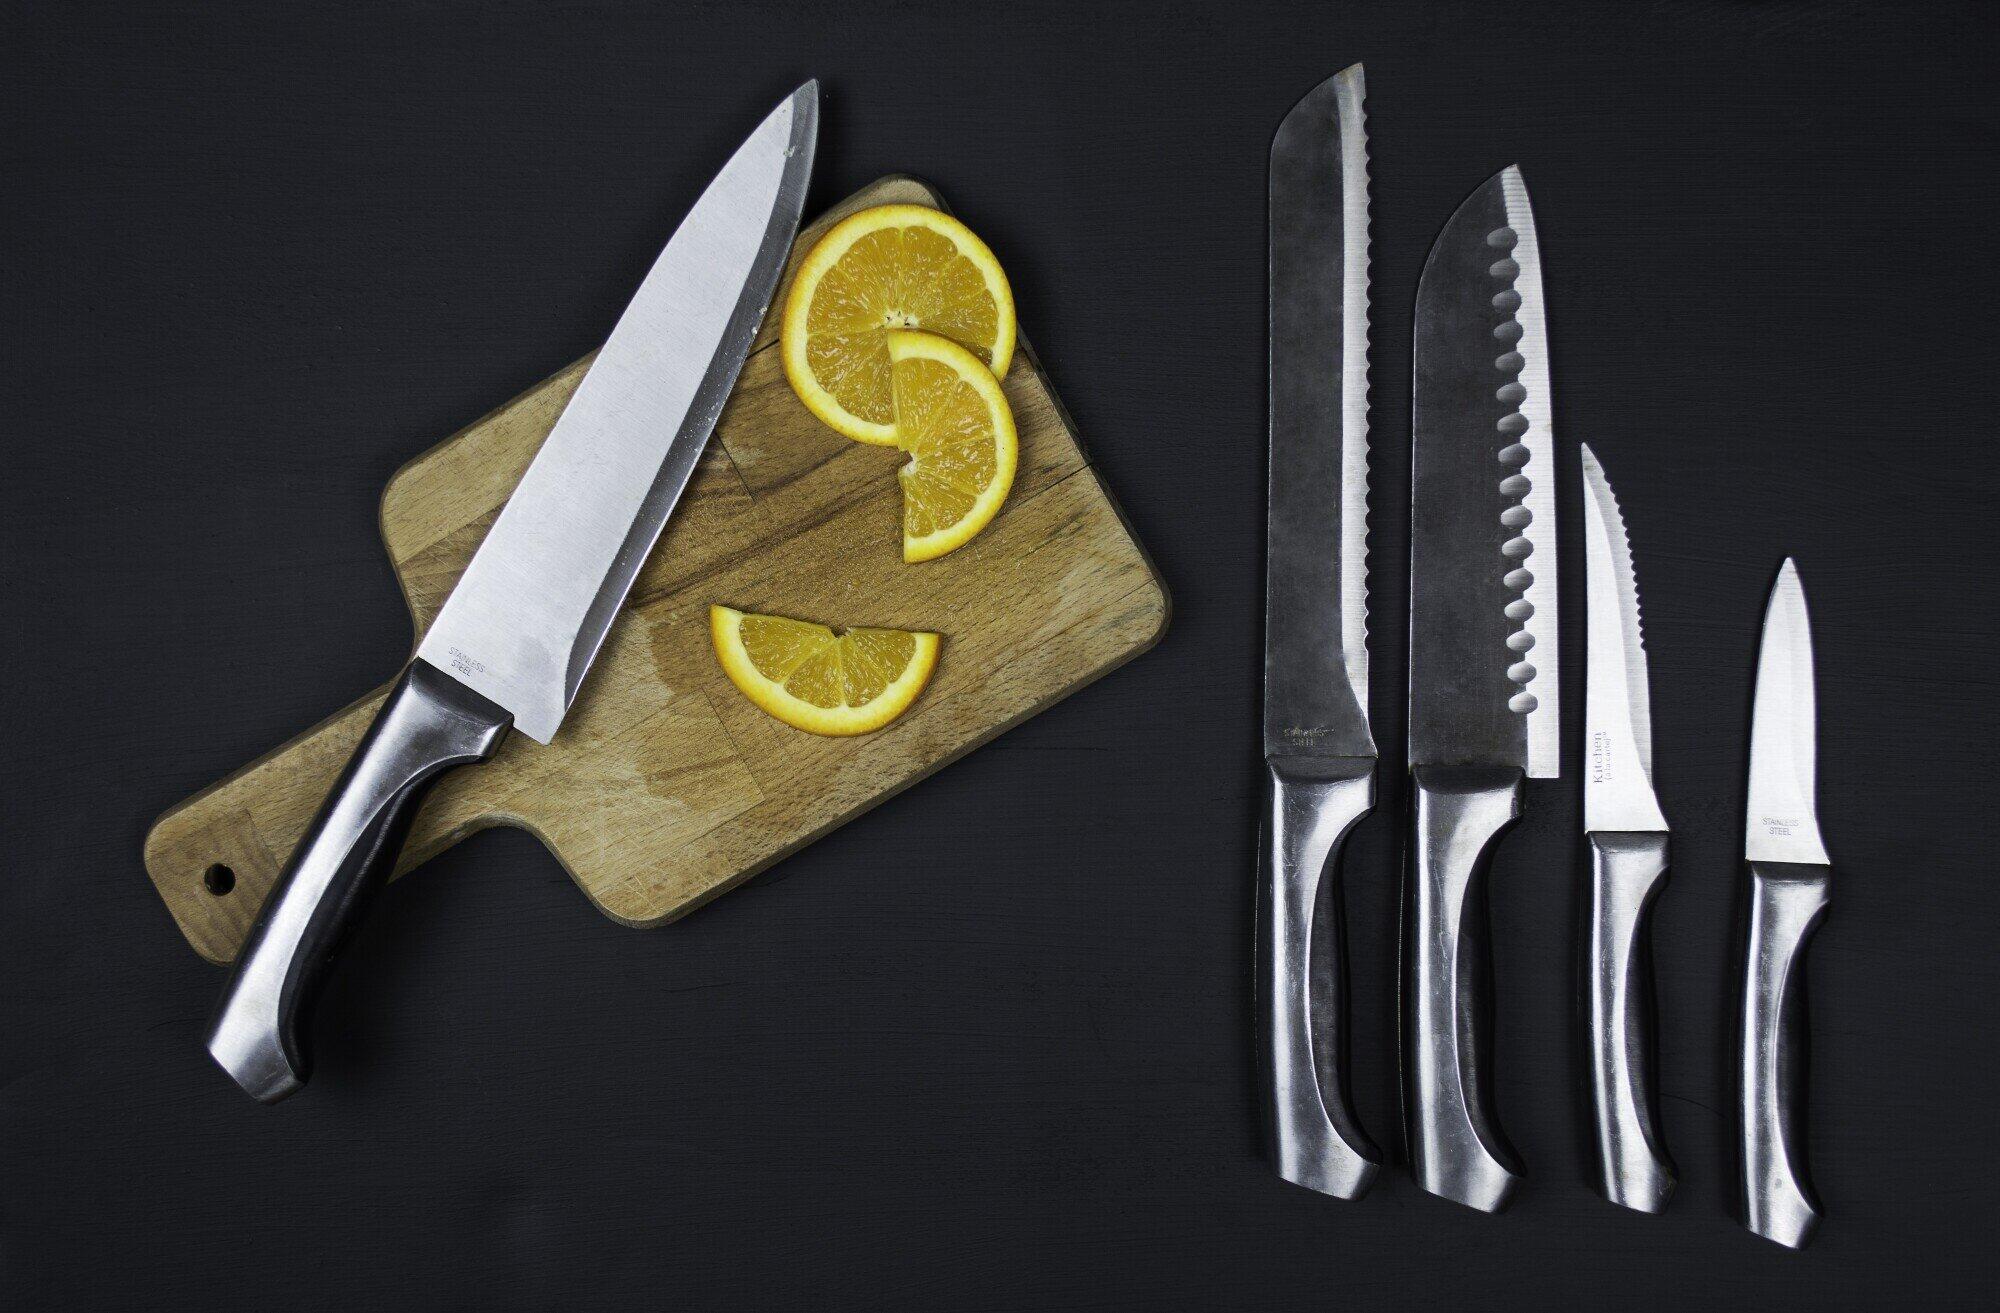 Mastering Knife Skills: 4 Ways to Use and Maintain Different Types of Kitchen Knives